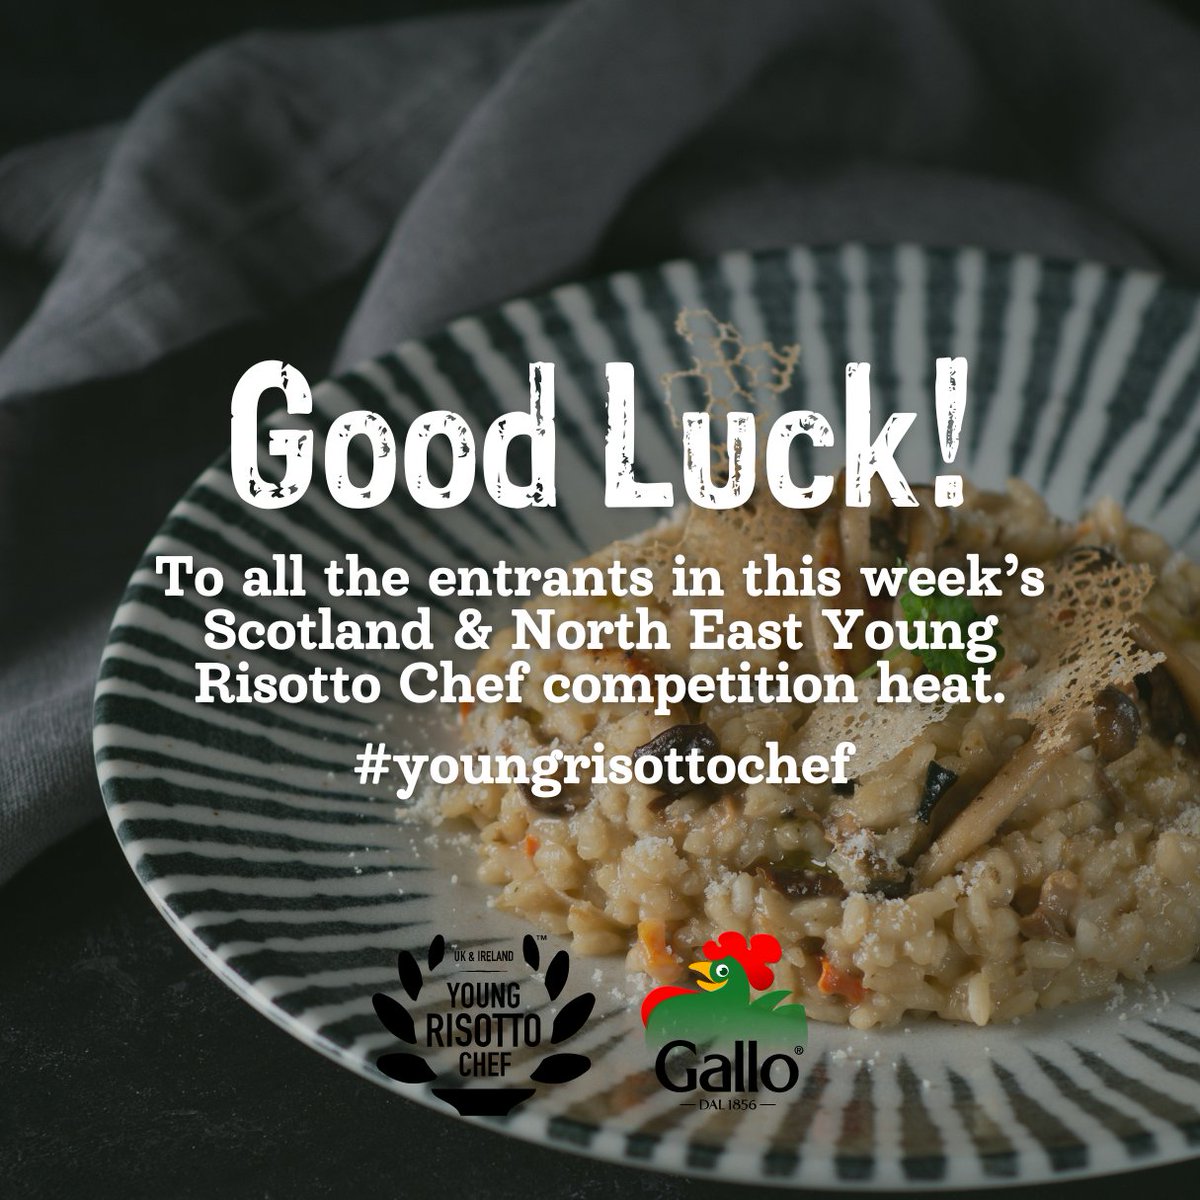 Good luck to the entrants of this week's Scotland and North East Young Risotto Chef heat! 🤩 We cannot wait to meet all of you and sample your dishes! #youngrisottochef #cookingcompetition #YRC24 #risotto #cookwithrisotto #RisoGallo